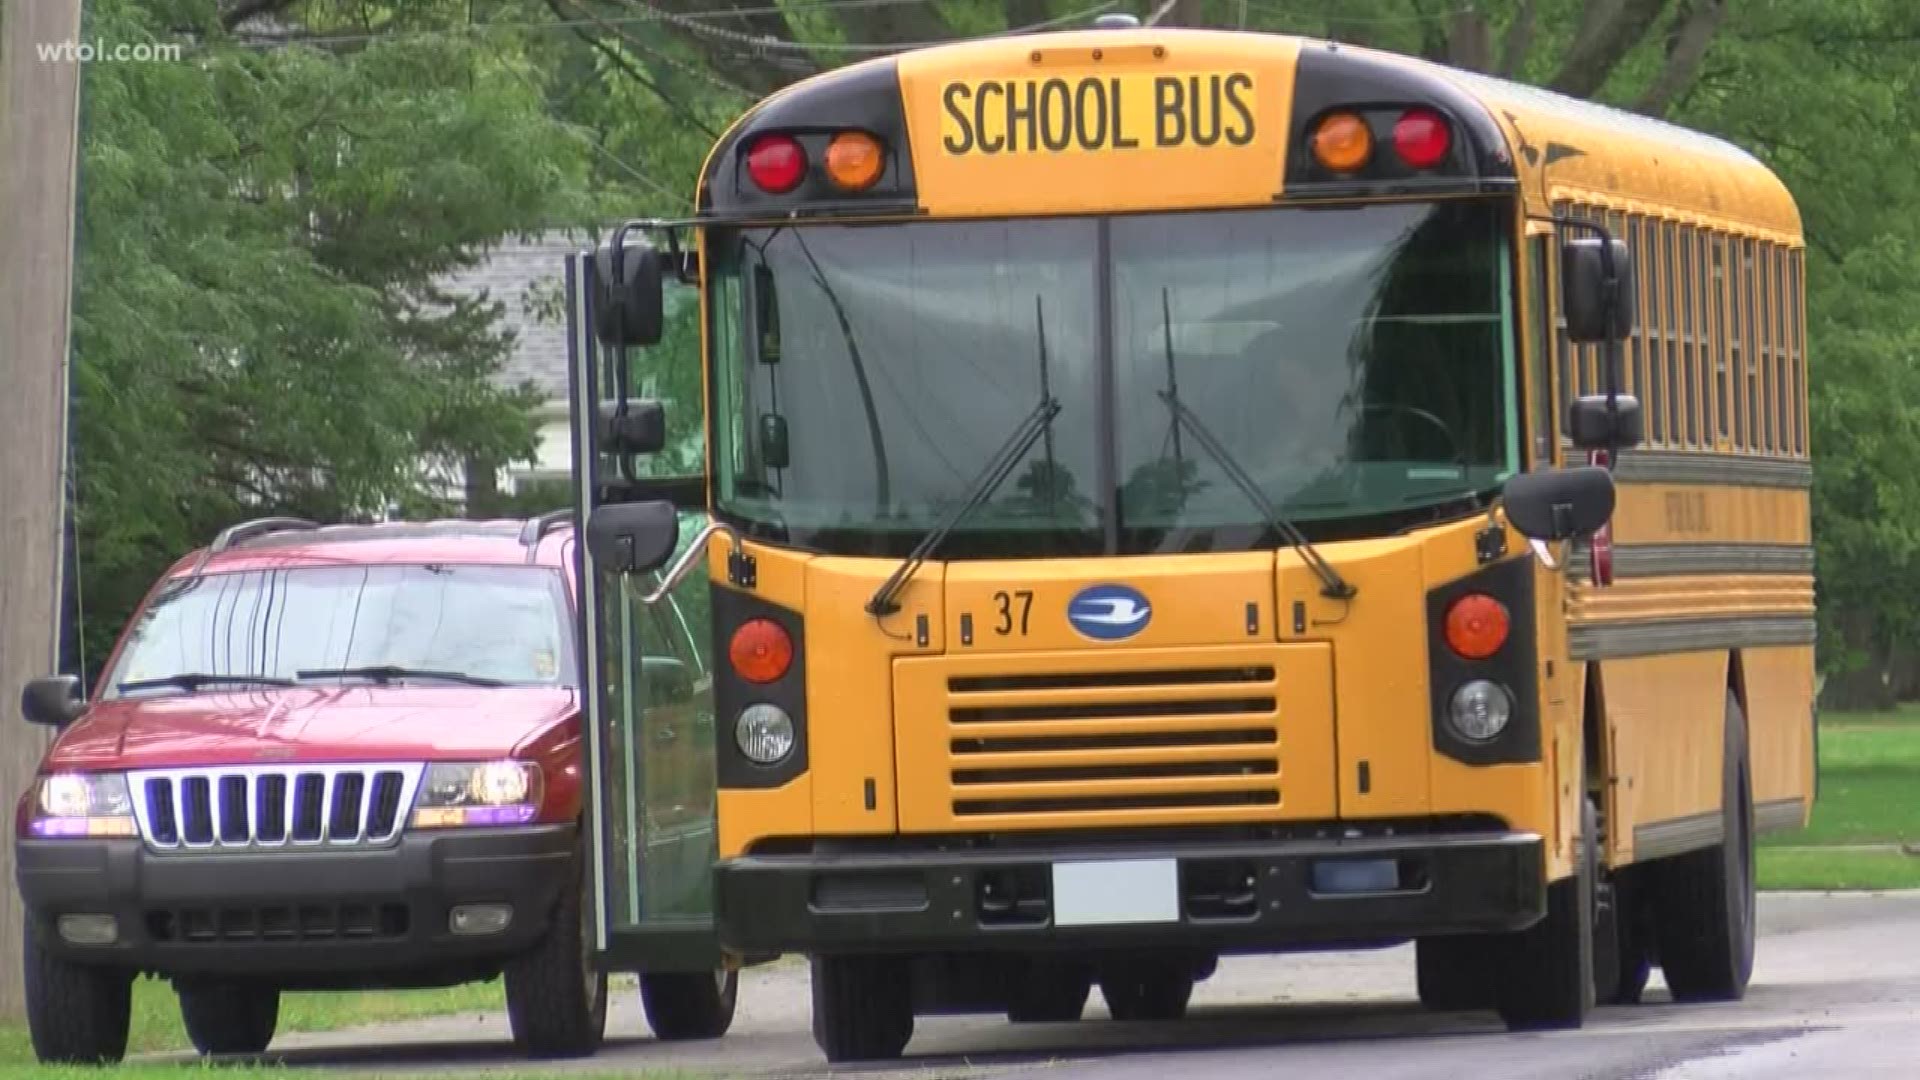 Local police officers hit the road Tuesday morning on school buses to make sure your children get to school safely.